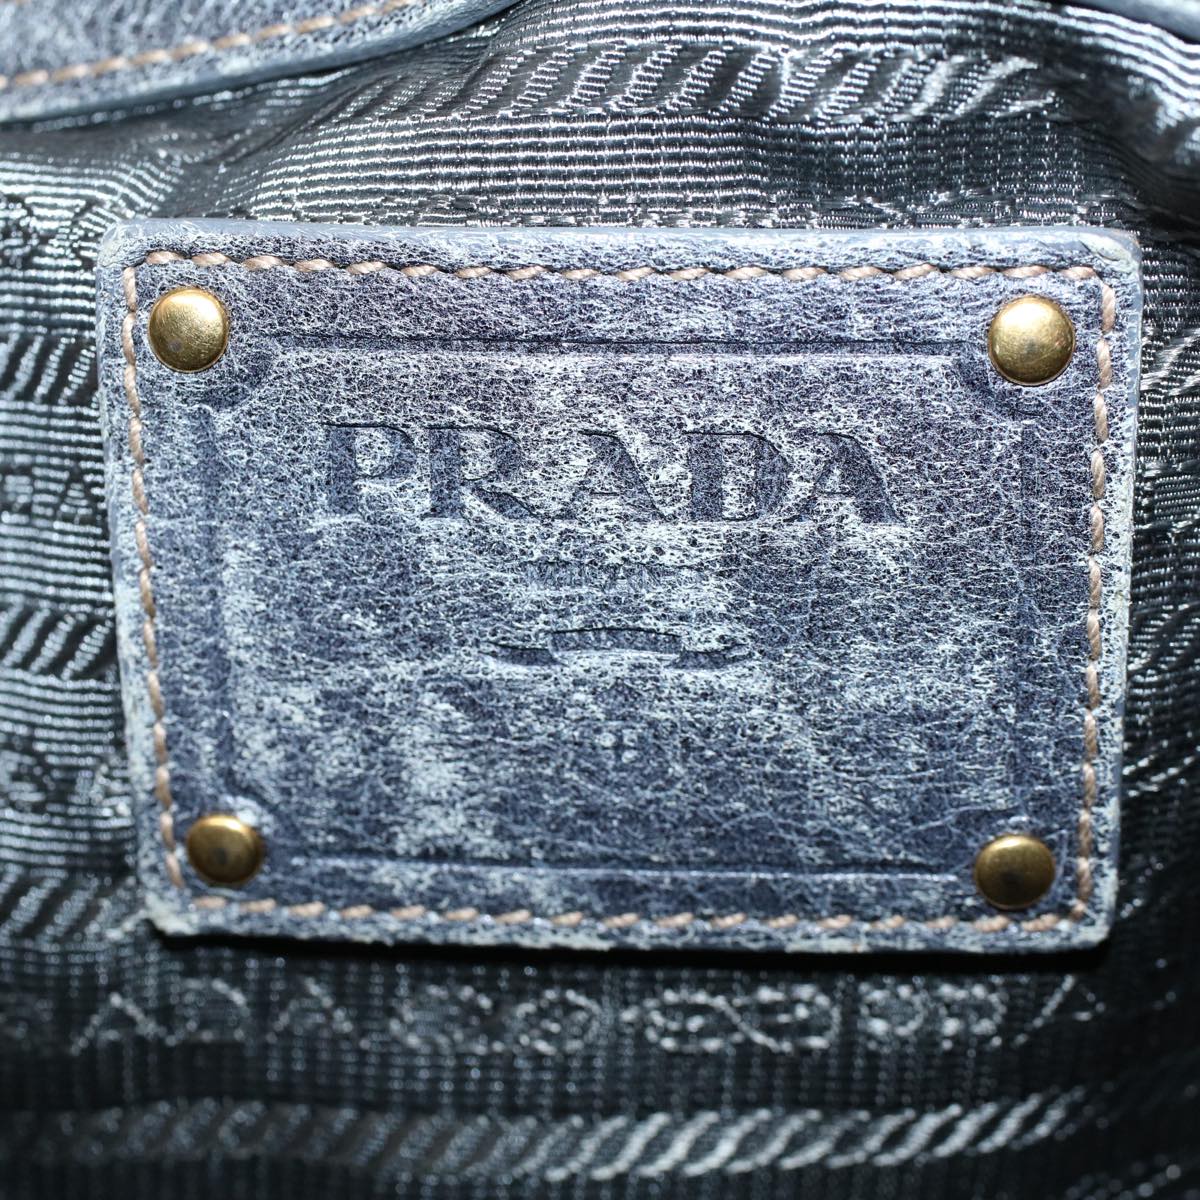 PRADA Tote Bag Leather 2way Gray Auth bs10117